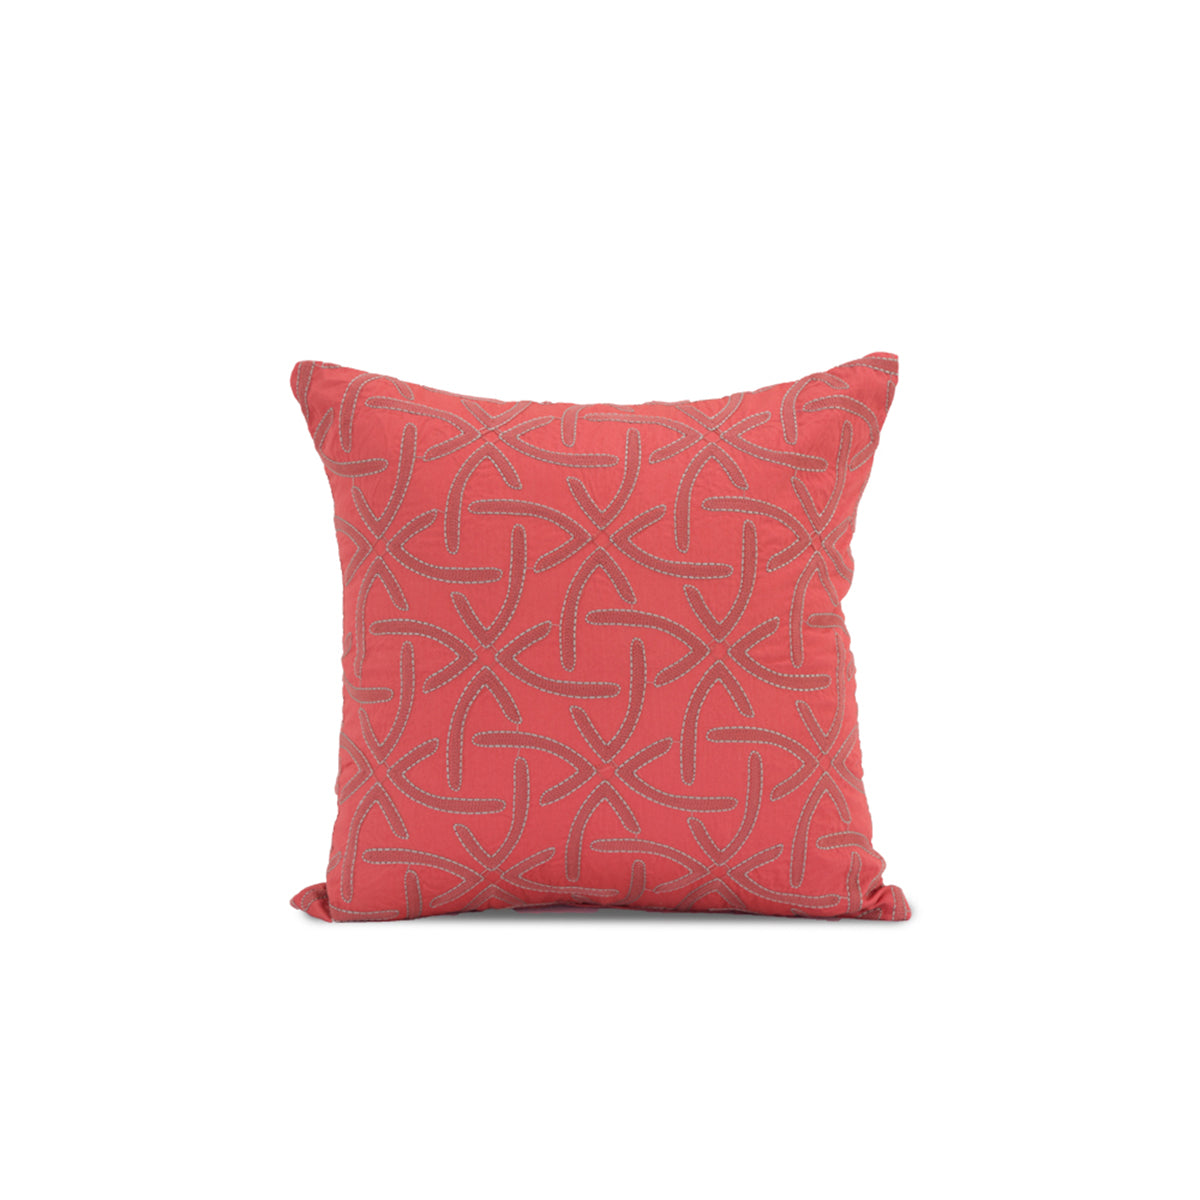 Ambler Embroidery Red Medium 45X45 Cm Embroidery Machine Cushion Cover